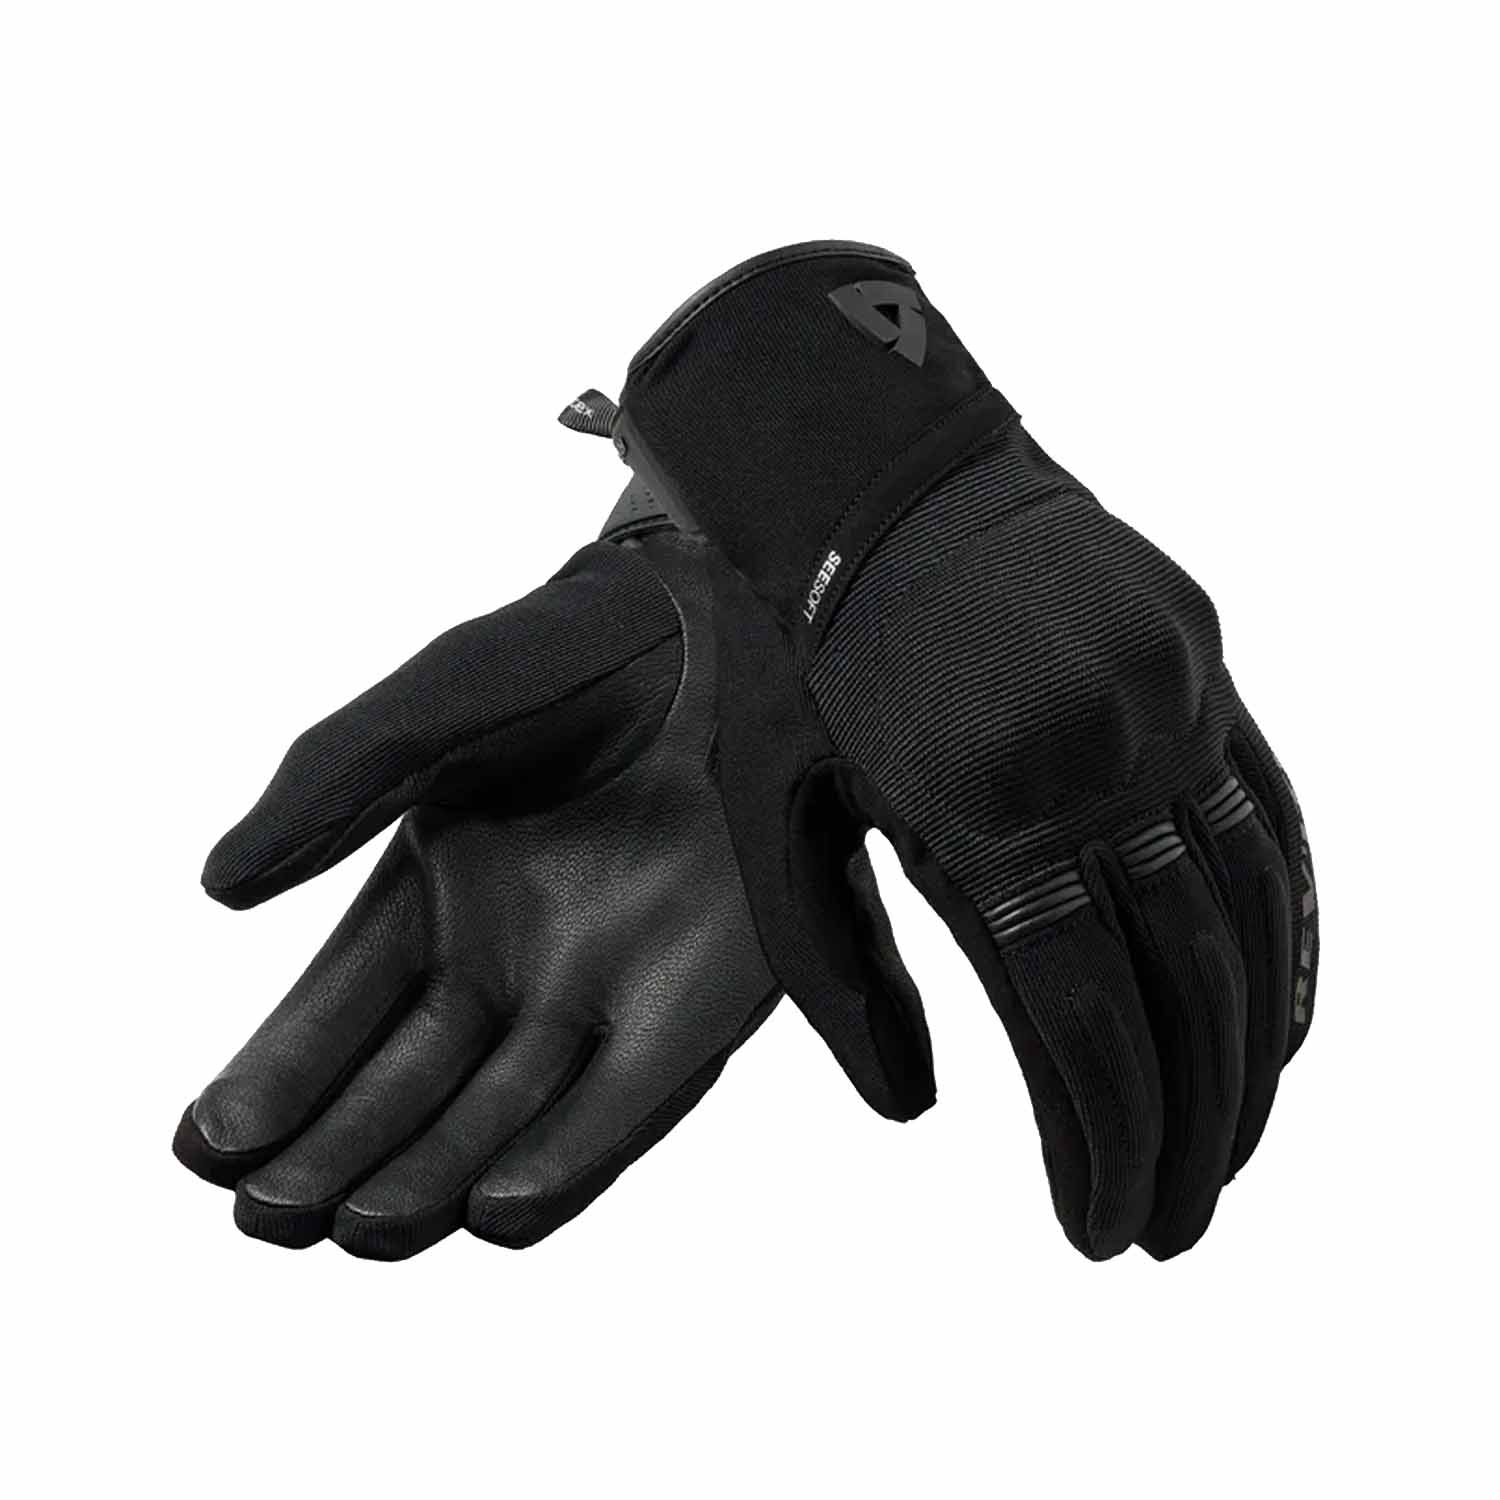 Image of EU REV'IT! Mosca 2 Ladies Gloves Black Taille XS